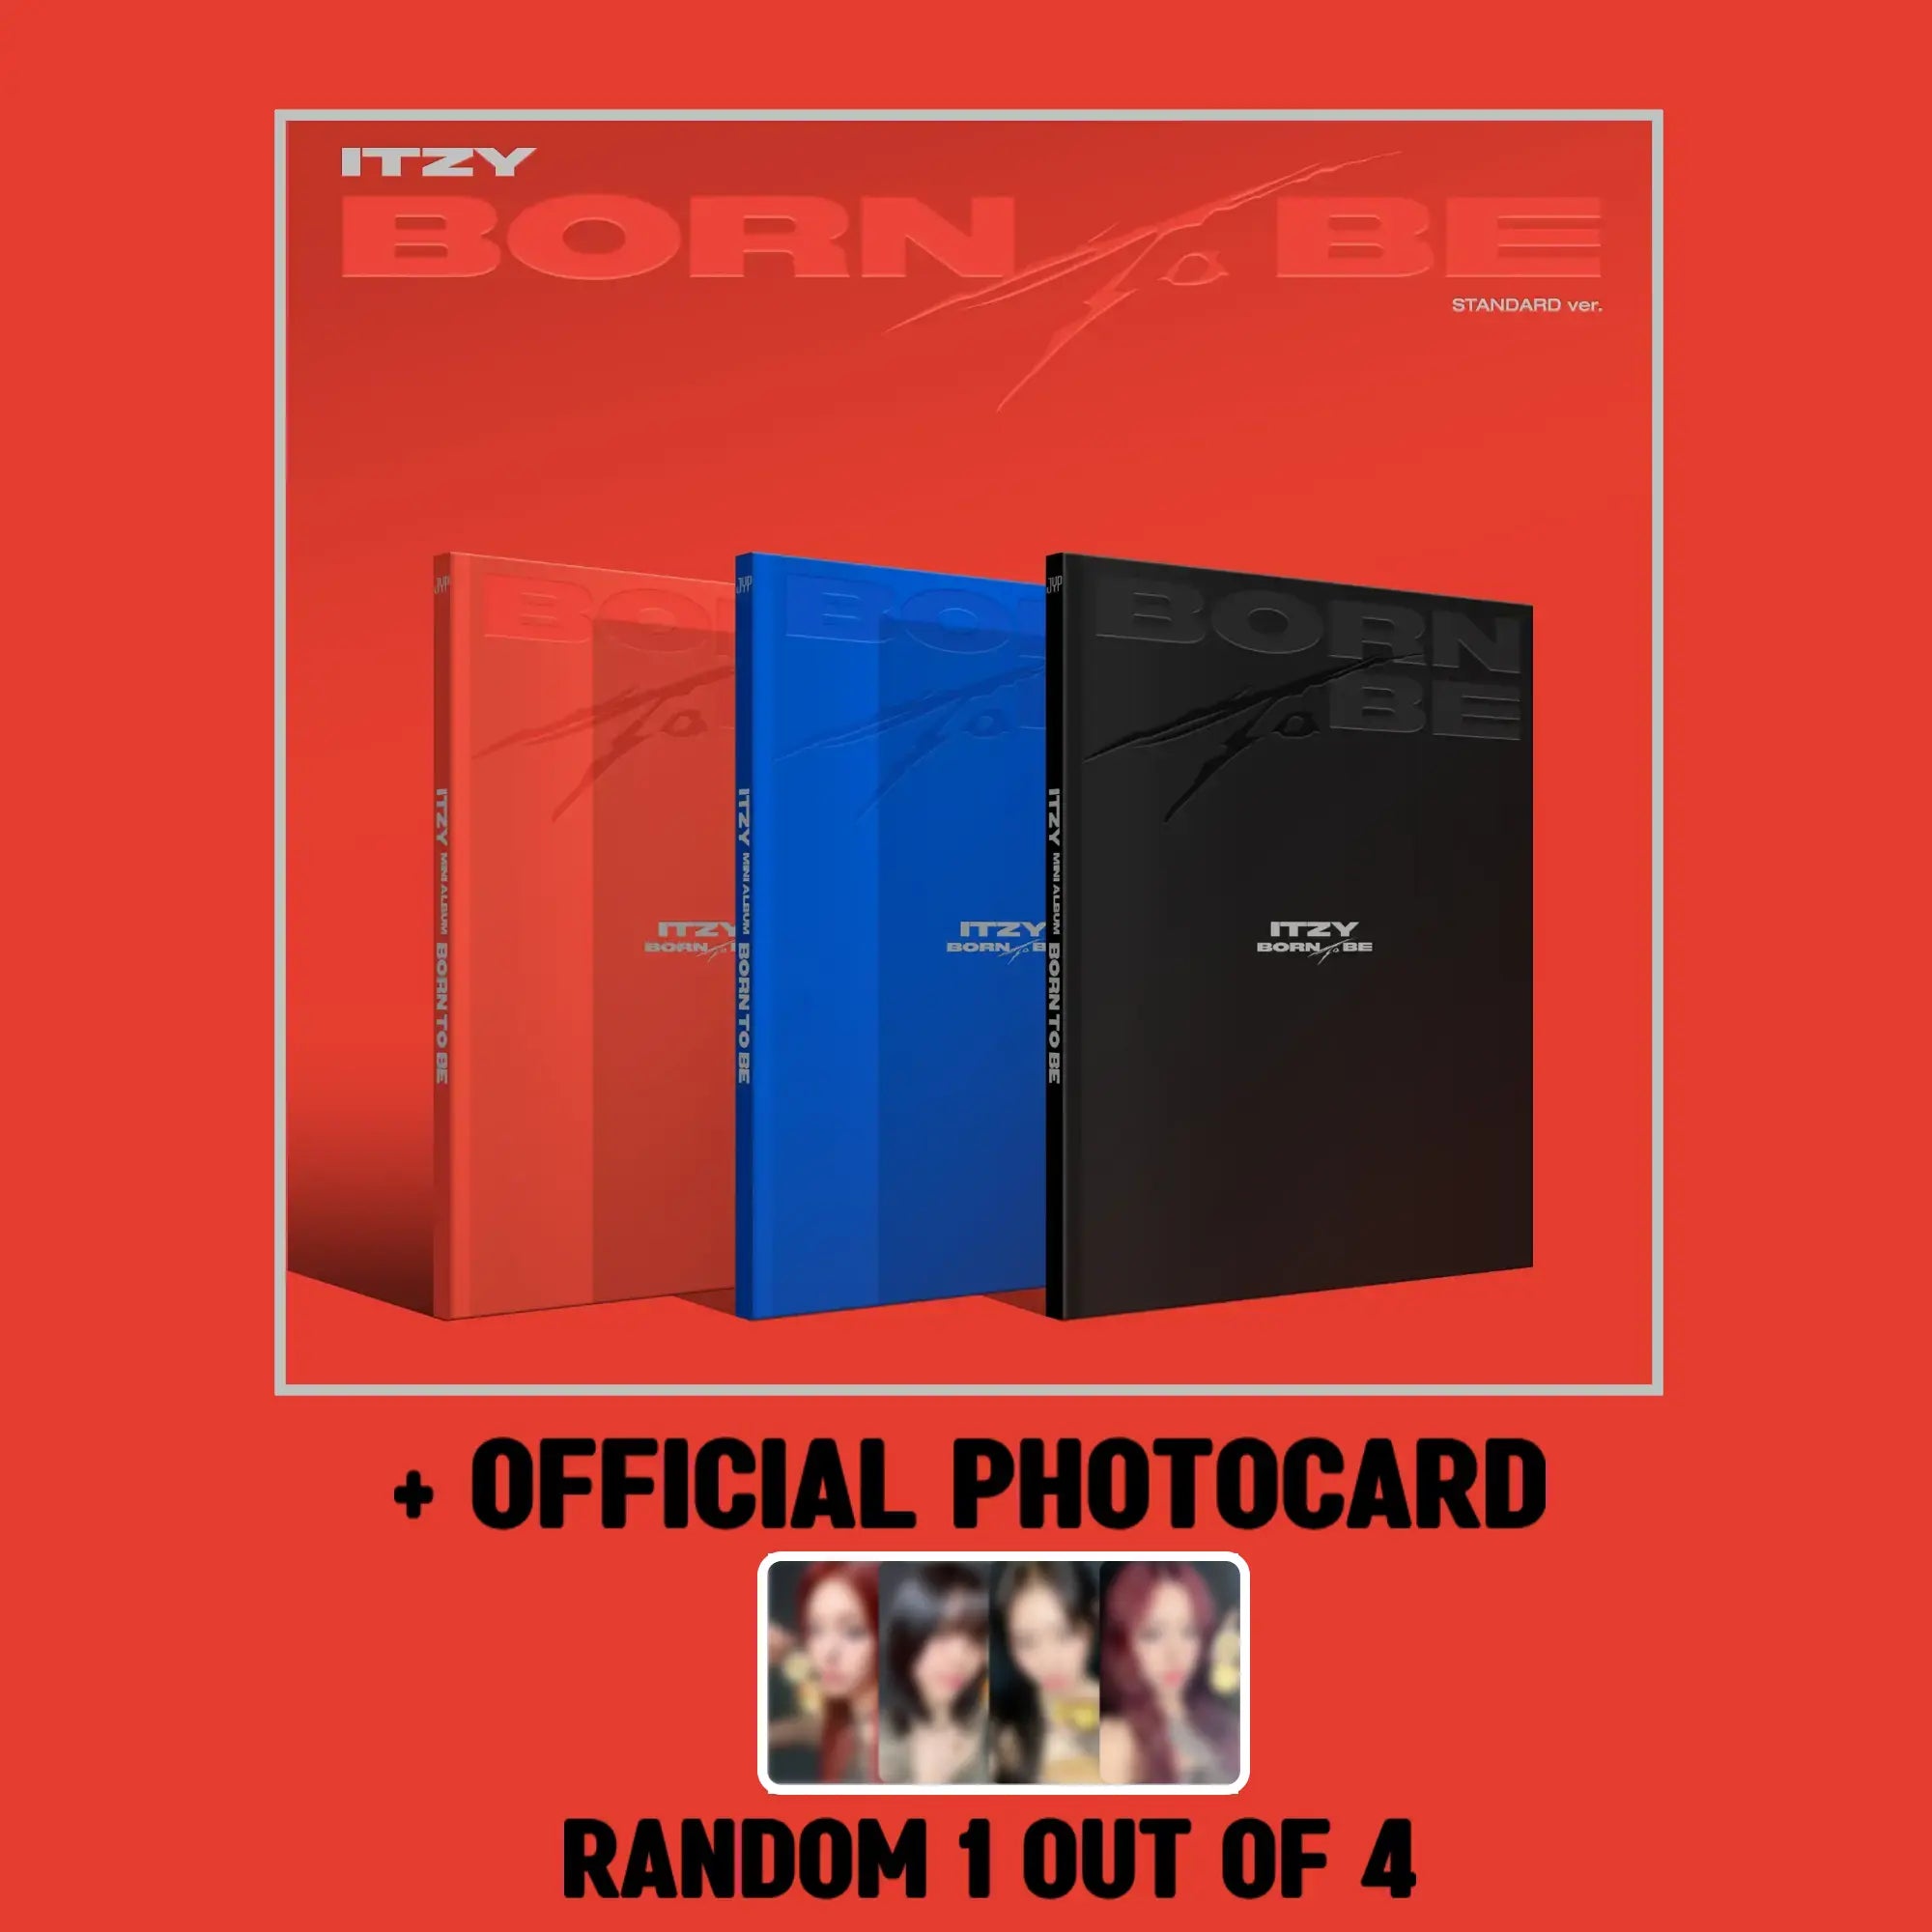 ITZY Album - BORN TO BE (Limited Ver.) – Choice Music LA